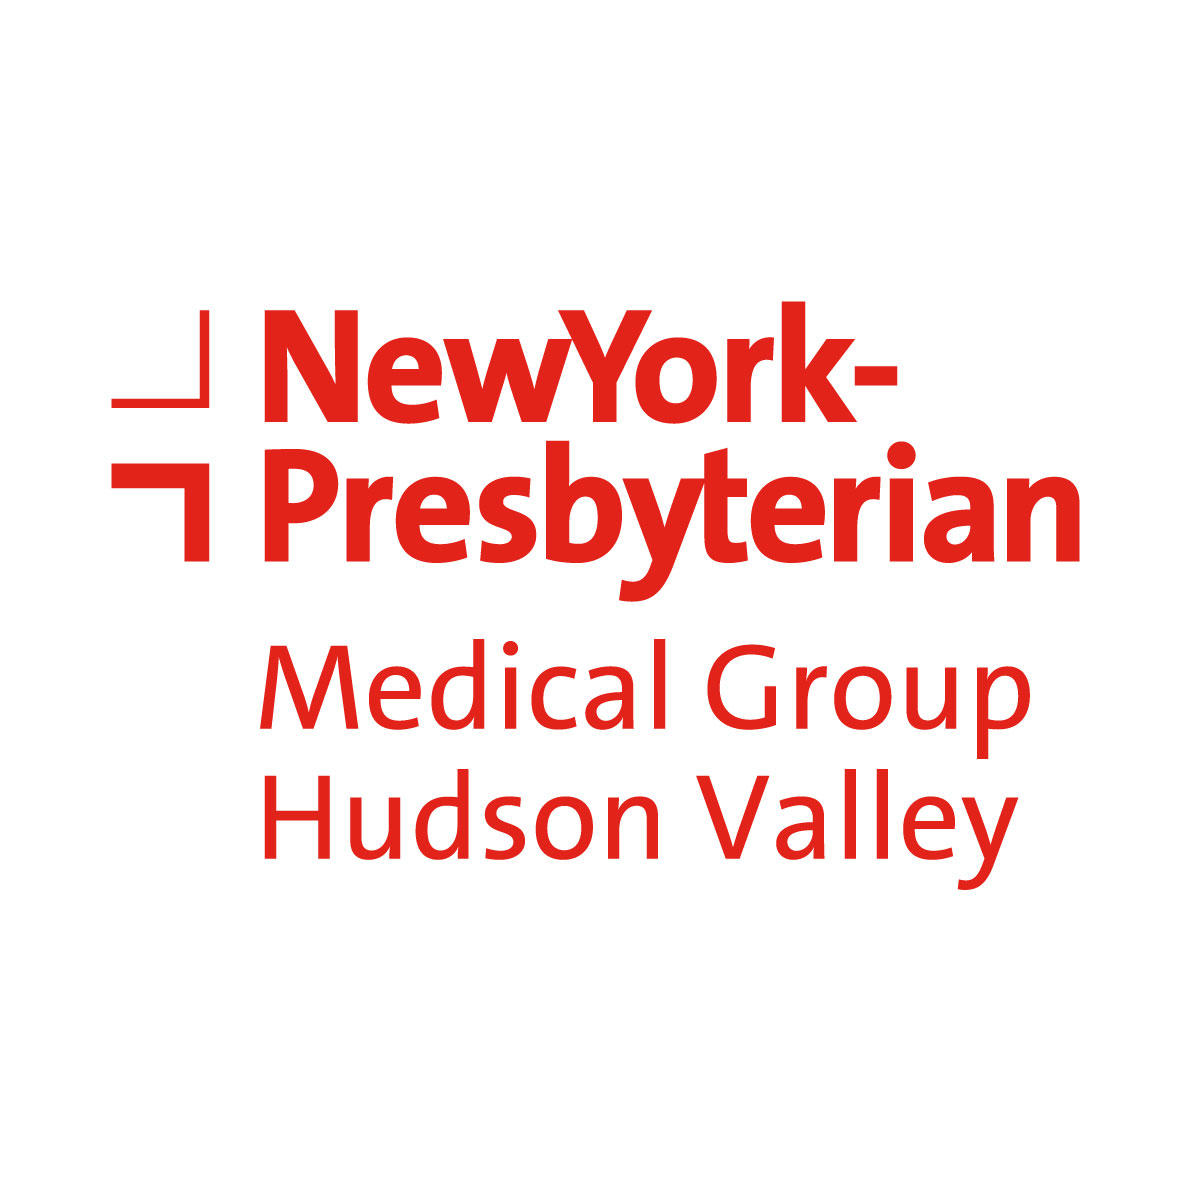 NewYork-Presbyterian Medical Group Hudson Valley - Nutrition and Weight Loss